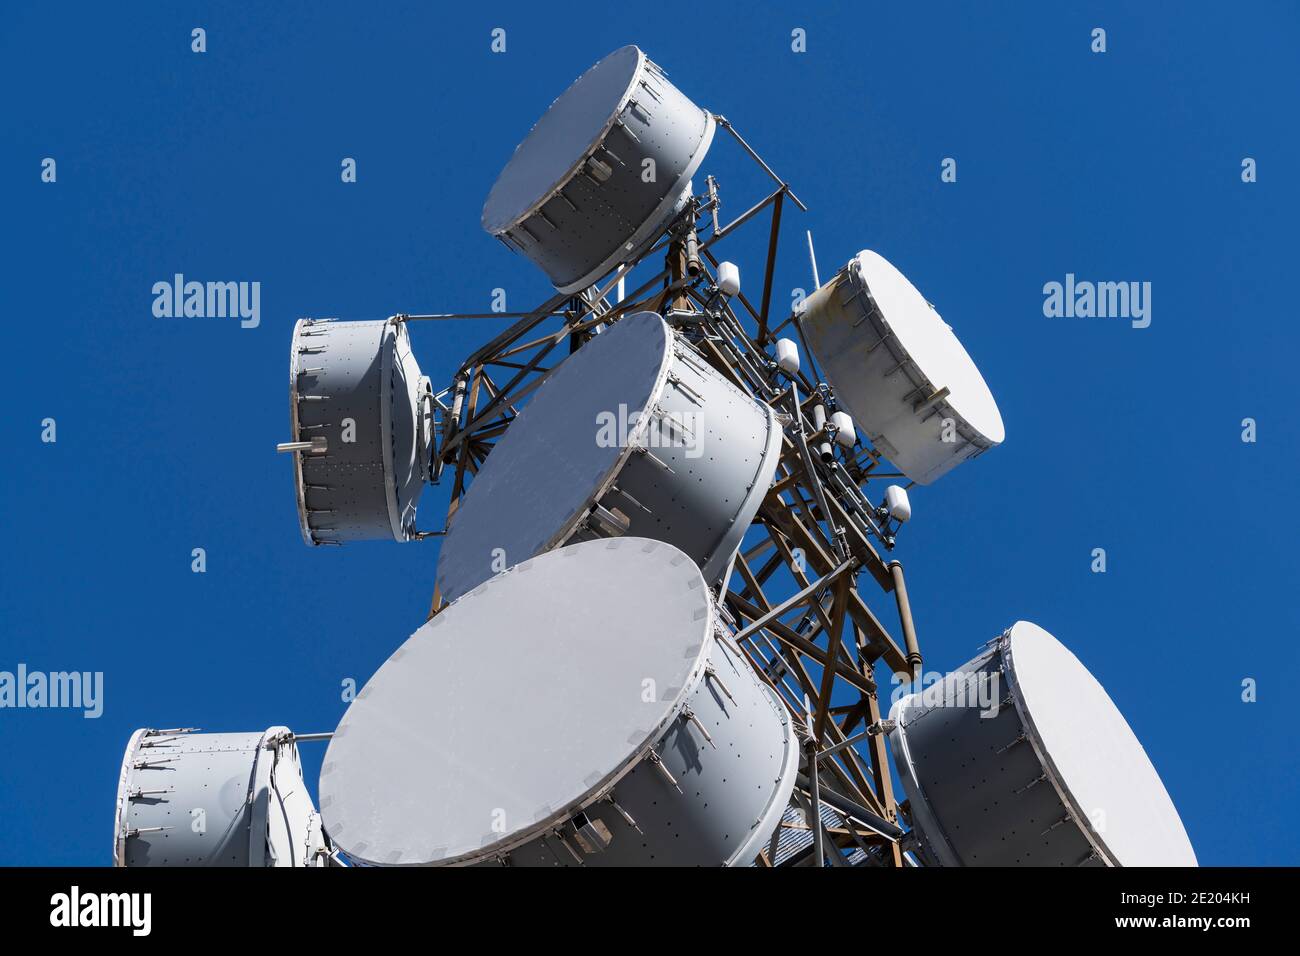 View of bass drum style microwave antennas on tall communications tower. Stock Photo